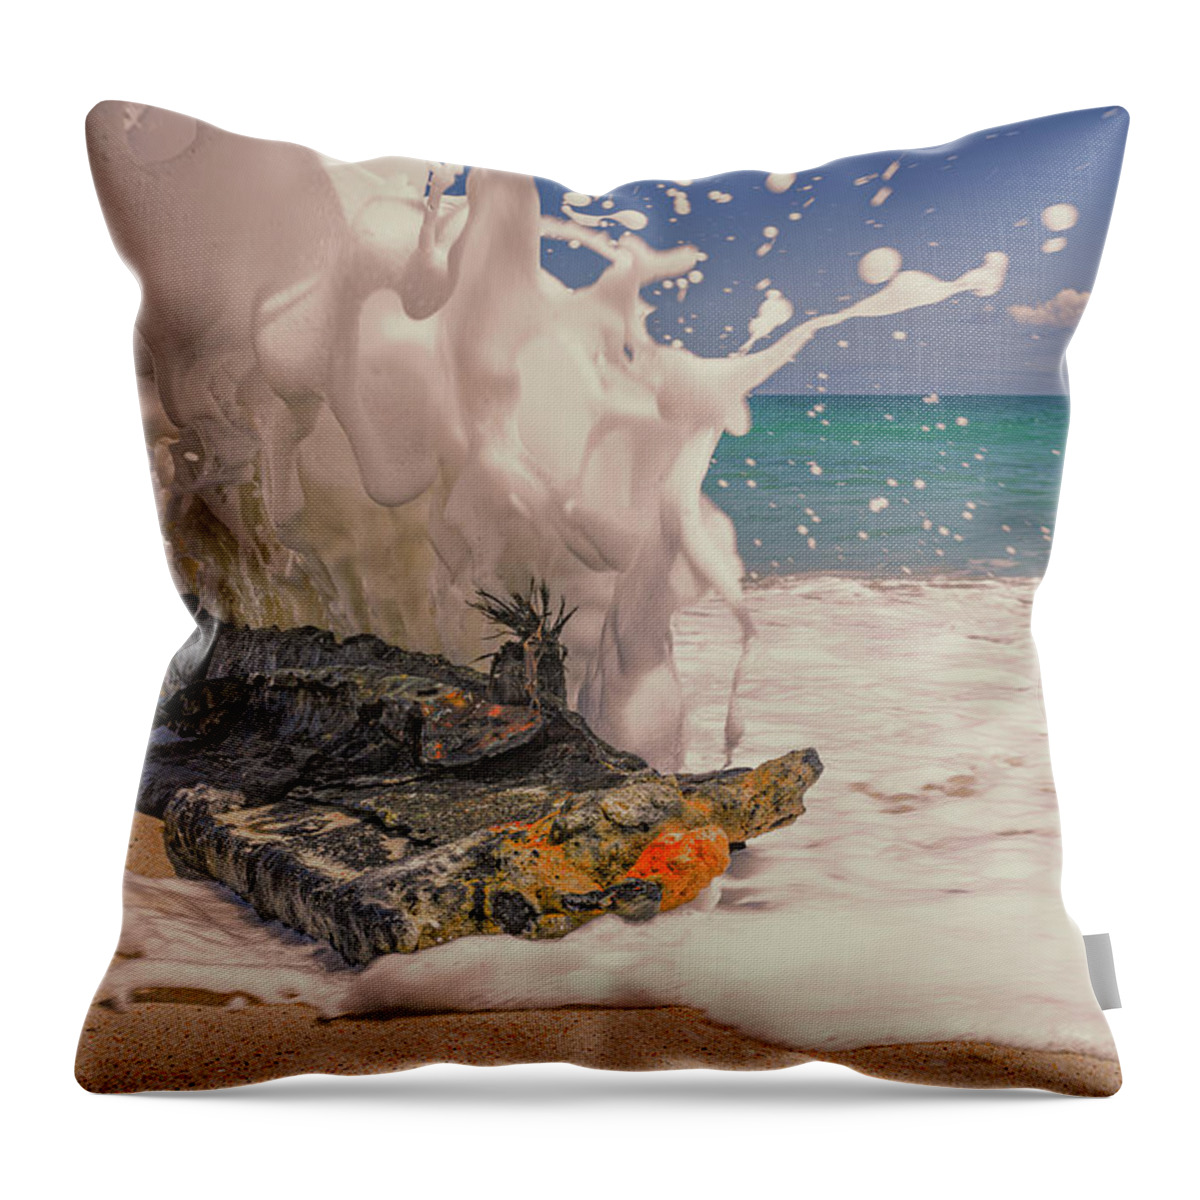 Action Throw Pillow featuring the photograph Splash by Jay Heifetz